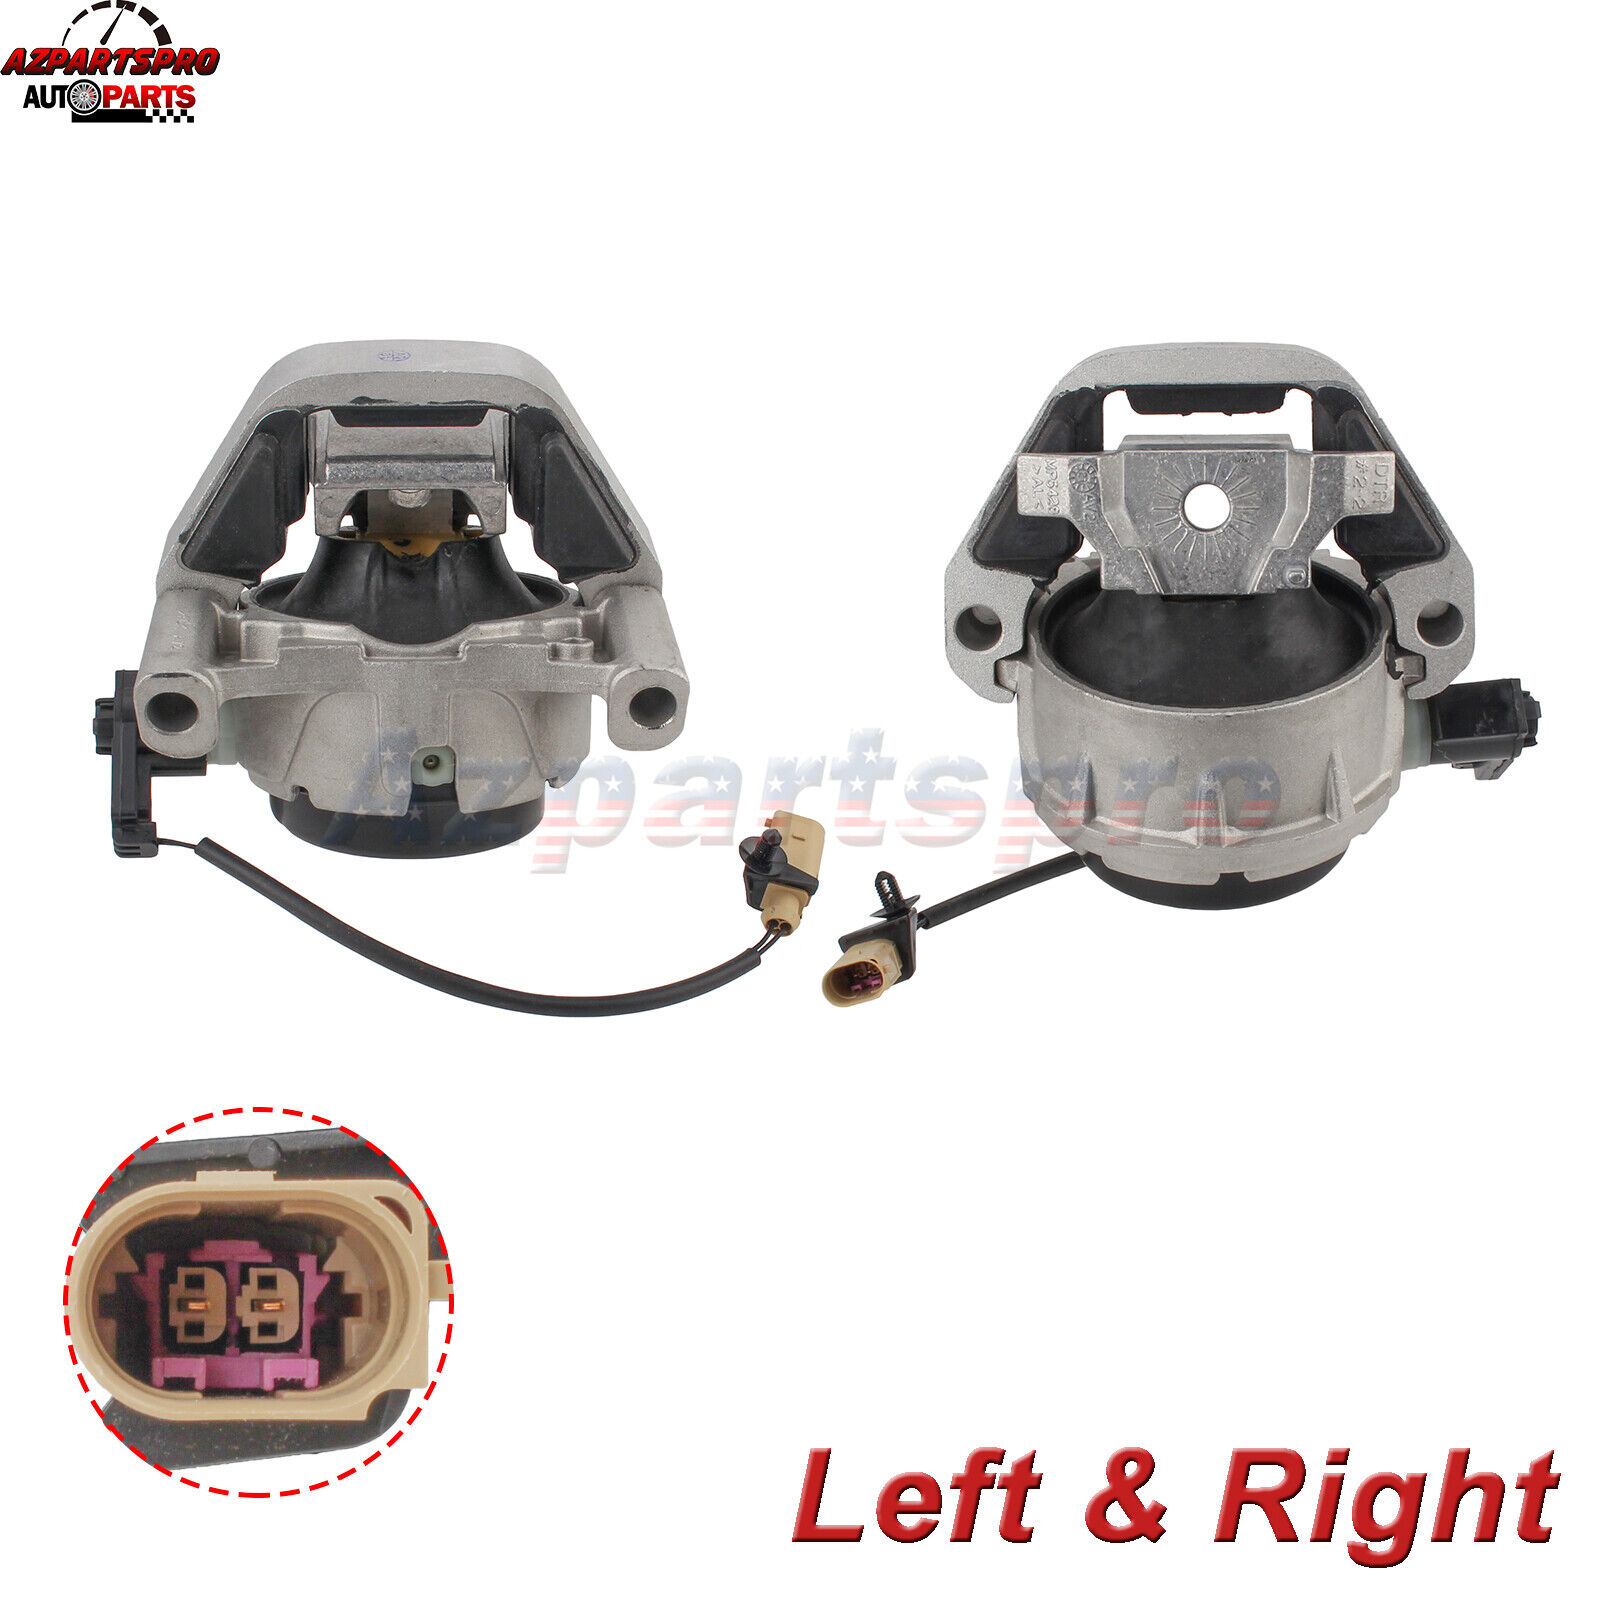 Pair of Engine Mounts Left & Right Side For Audi A6 Quattro 2.0T 2012-2018